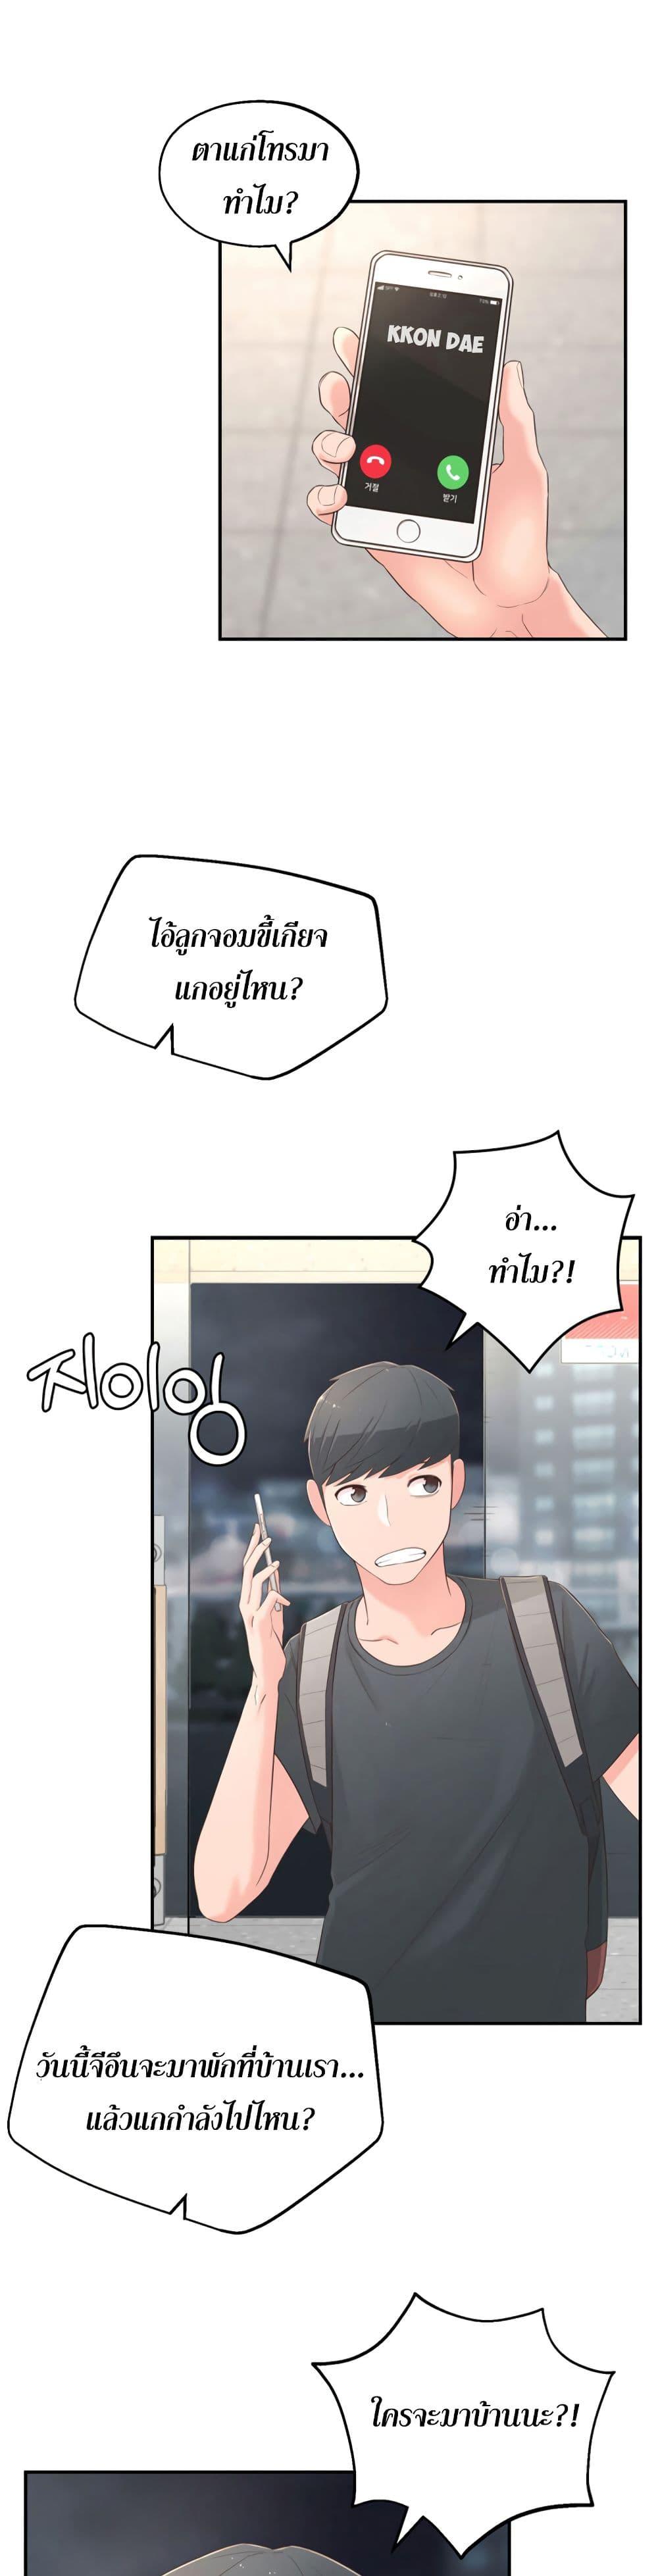 A Knowing Sister 1 ภาพ 46